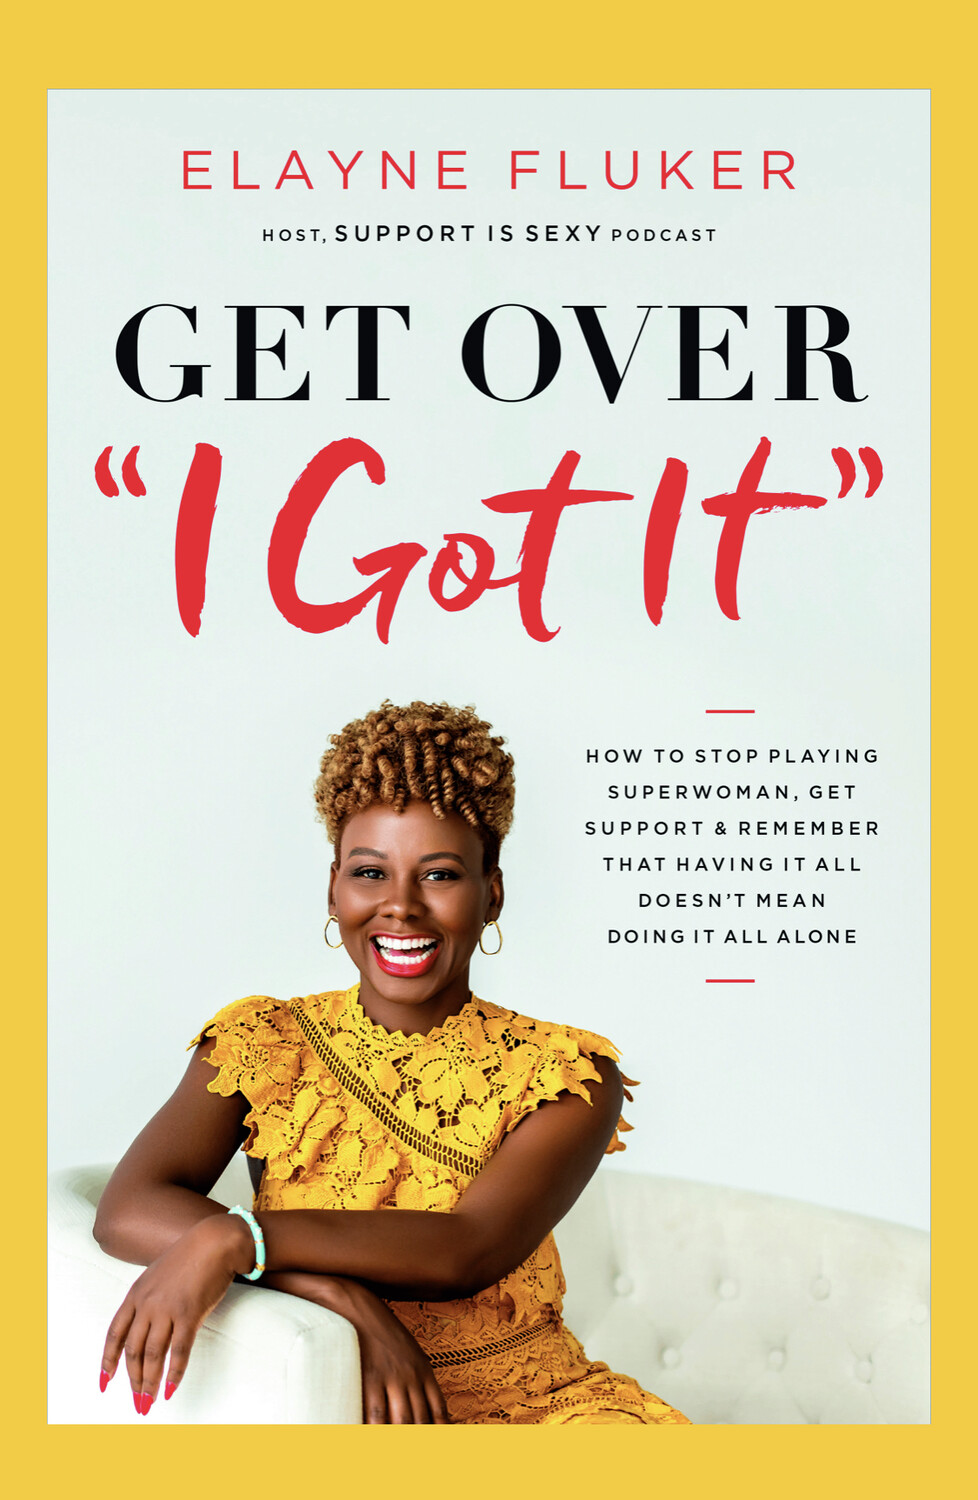 Elayne Fluker, author of GET OVER "I Got It" (HarperCollins Leadership) for ambitious women to get support